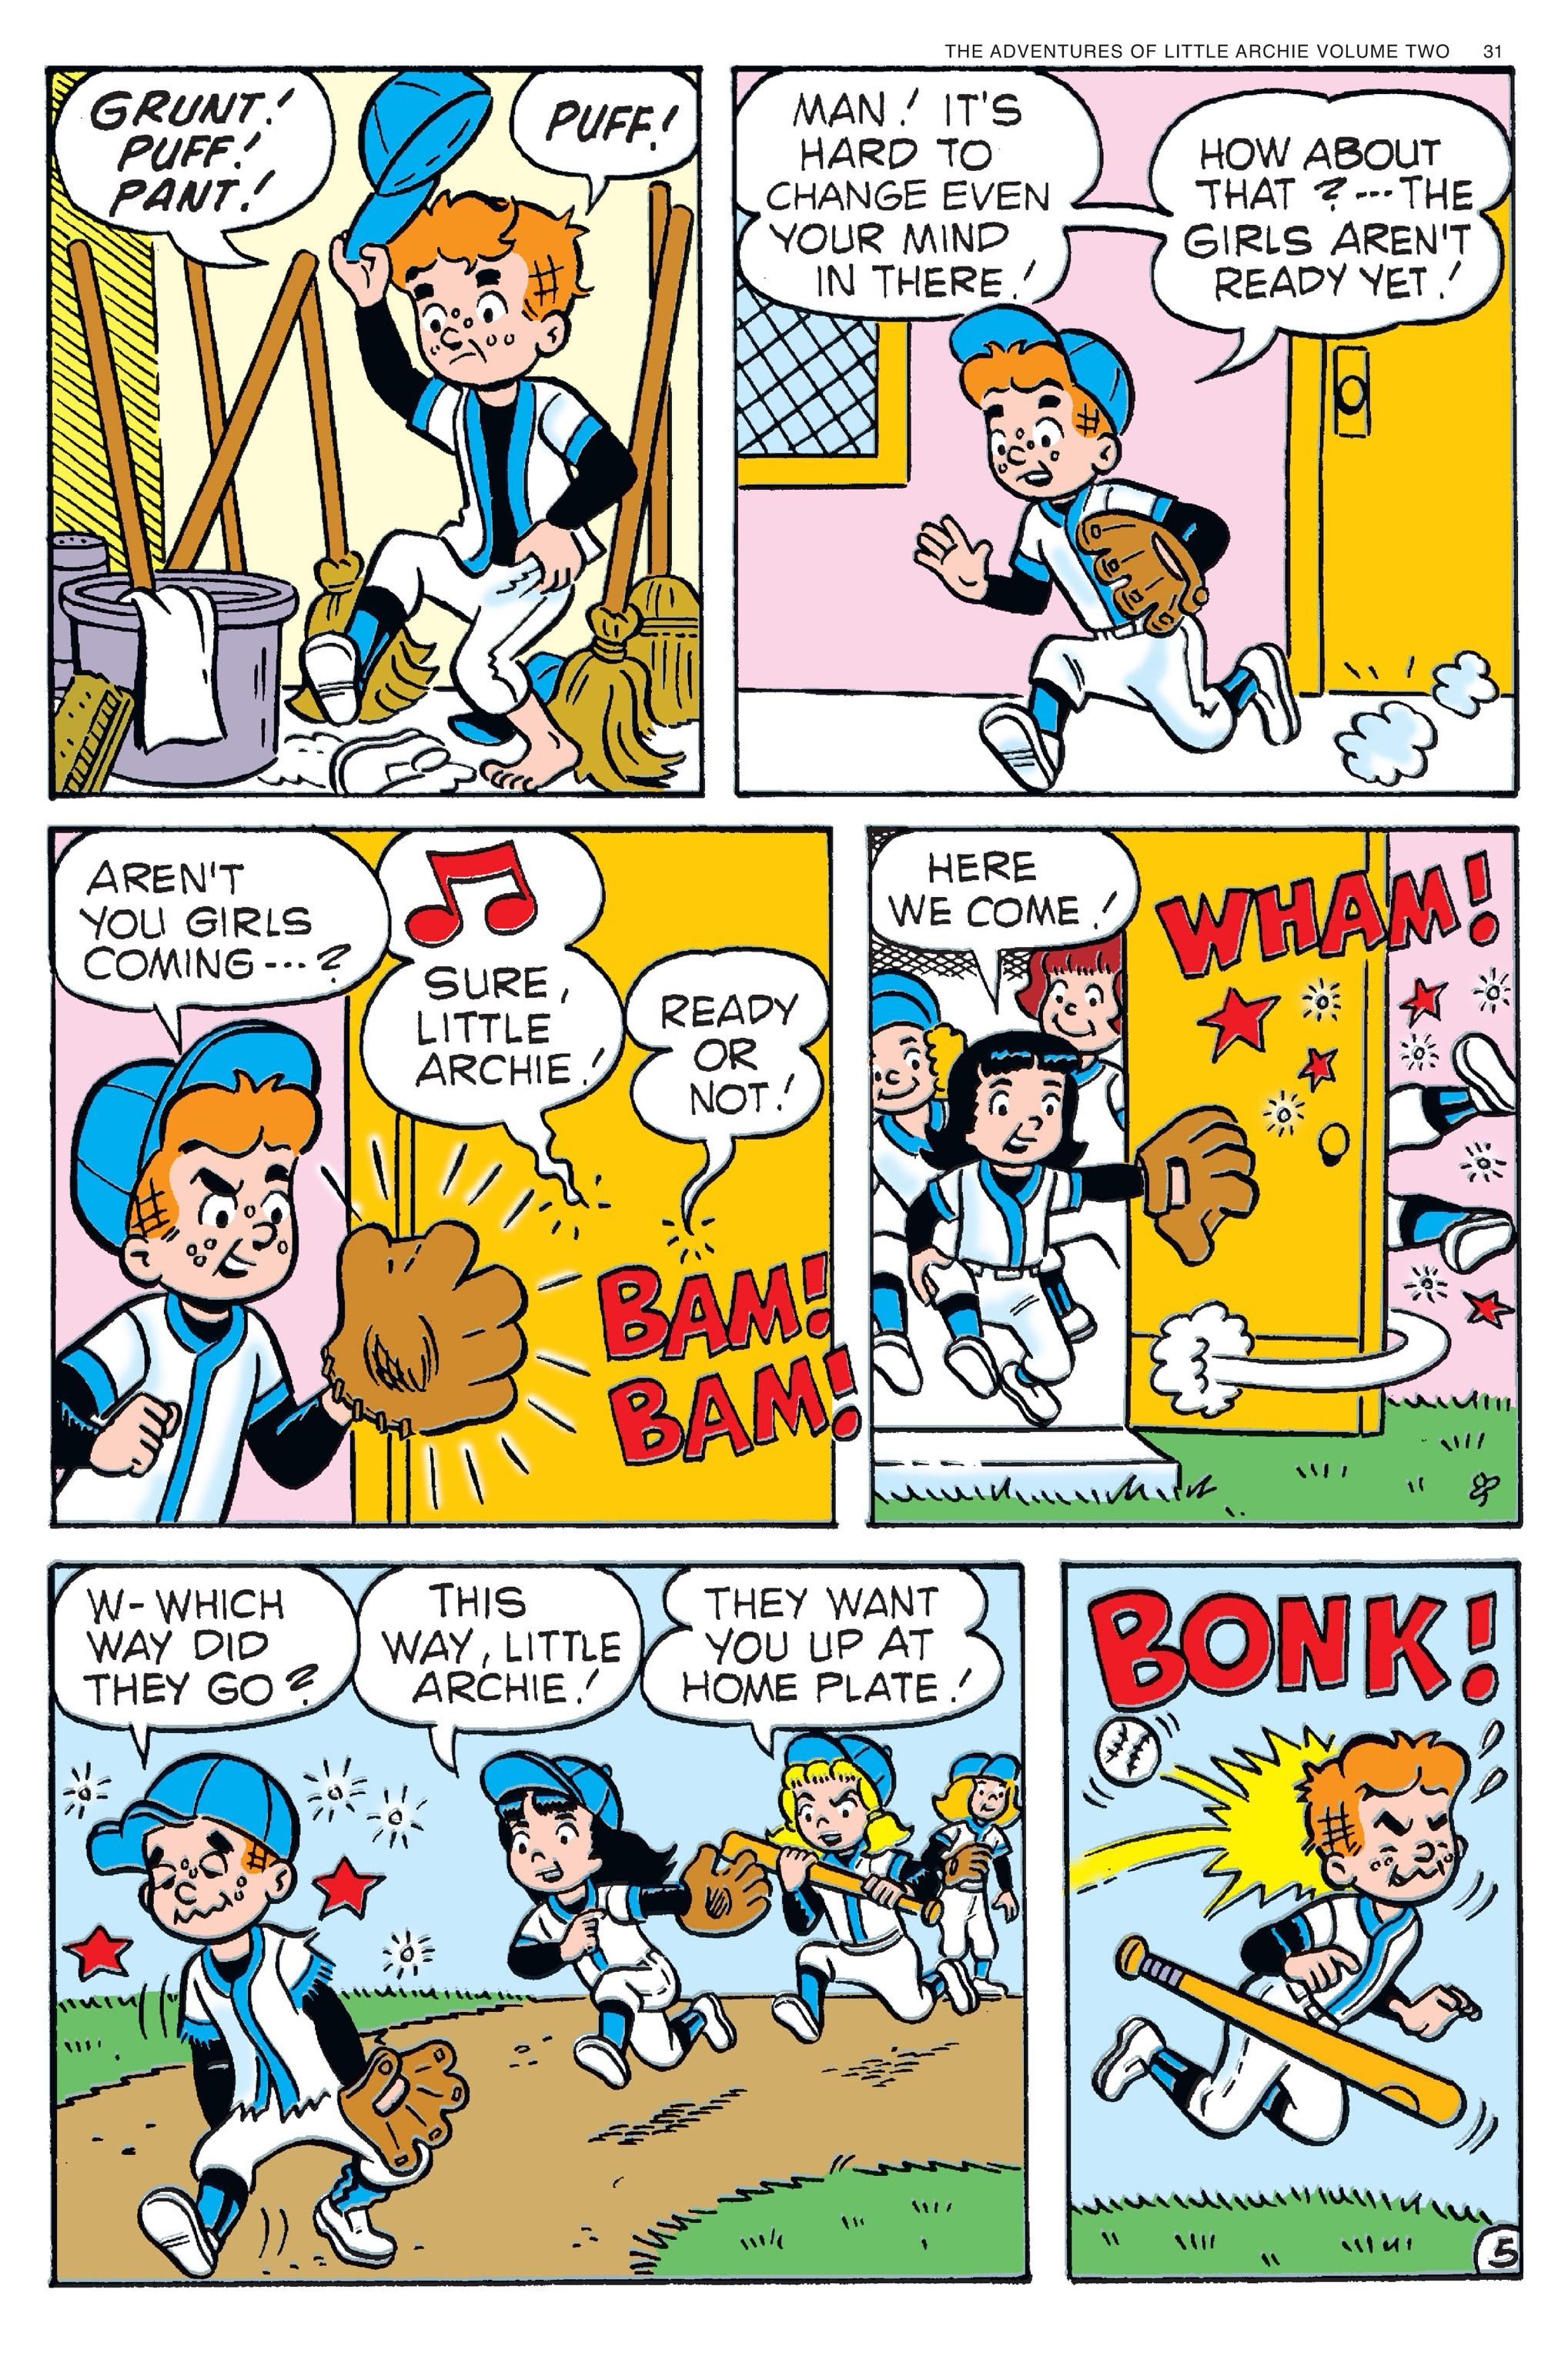 Read online Adventures of Little Archie comic -  Issue # TPB 2 - 32